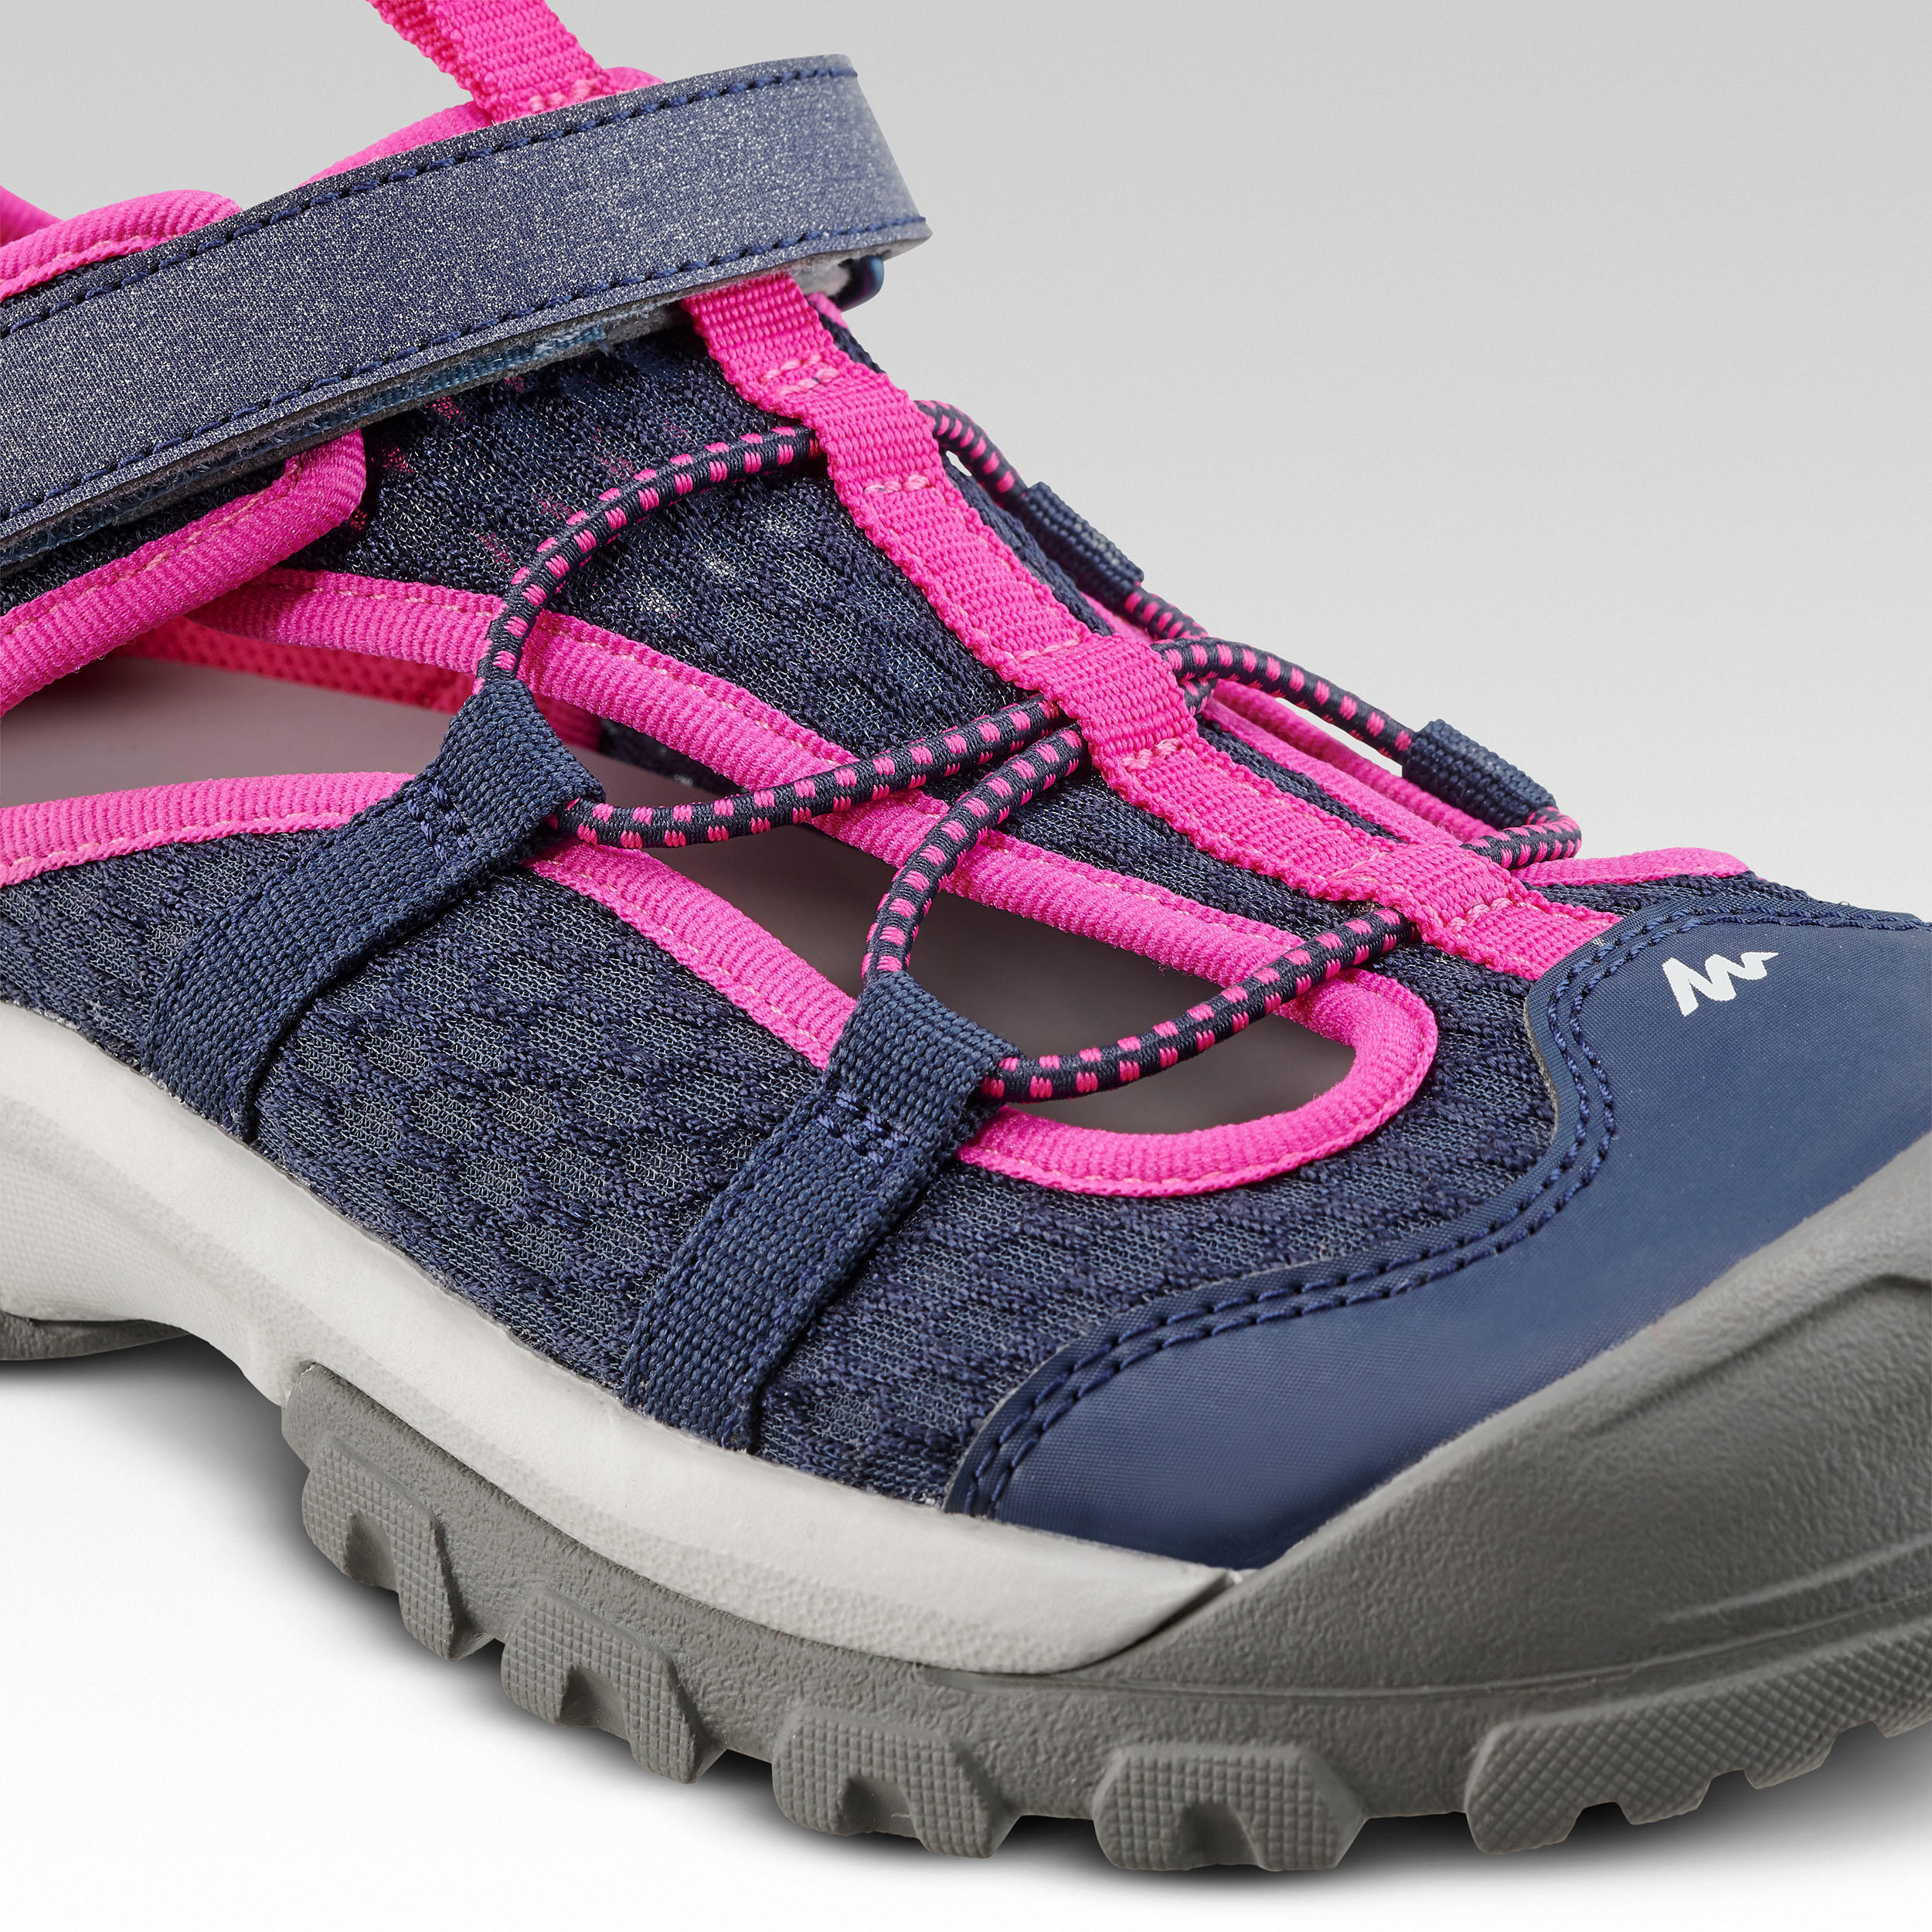 Children's hiking sandals MH150 TW blue pink - JR size 10 TO 6 6/6